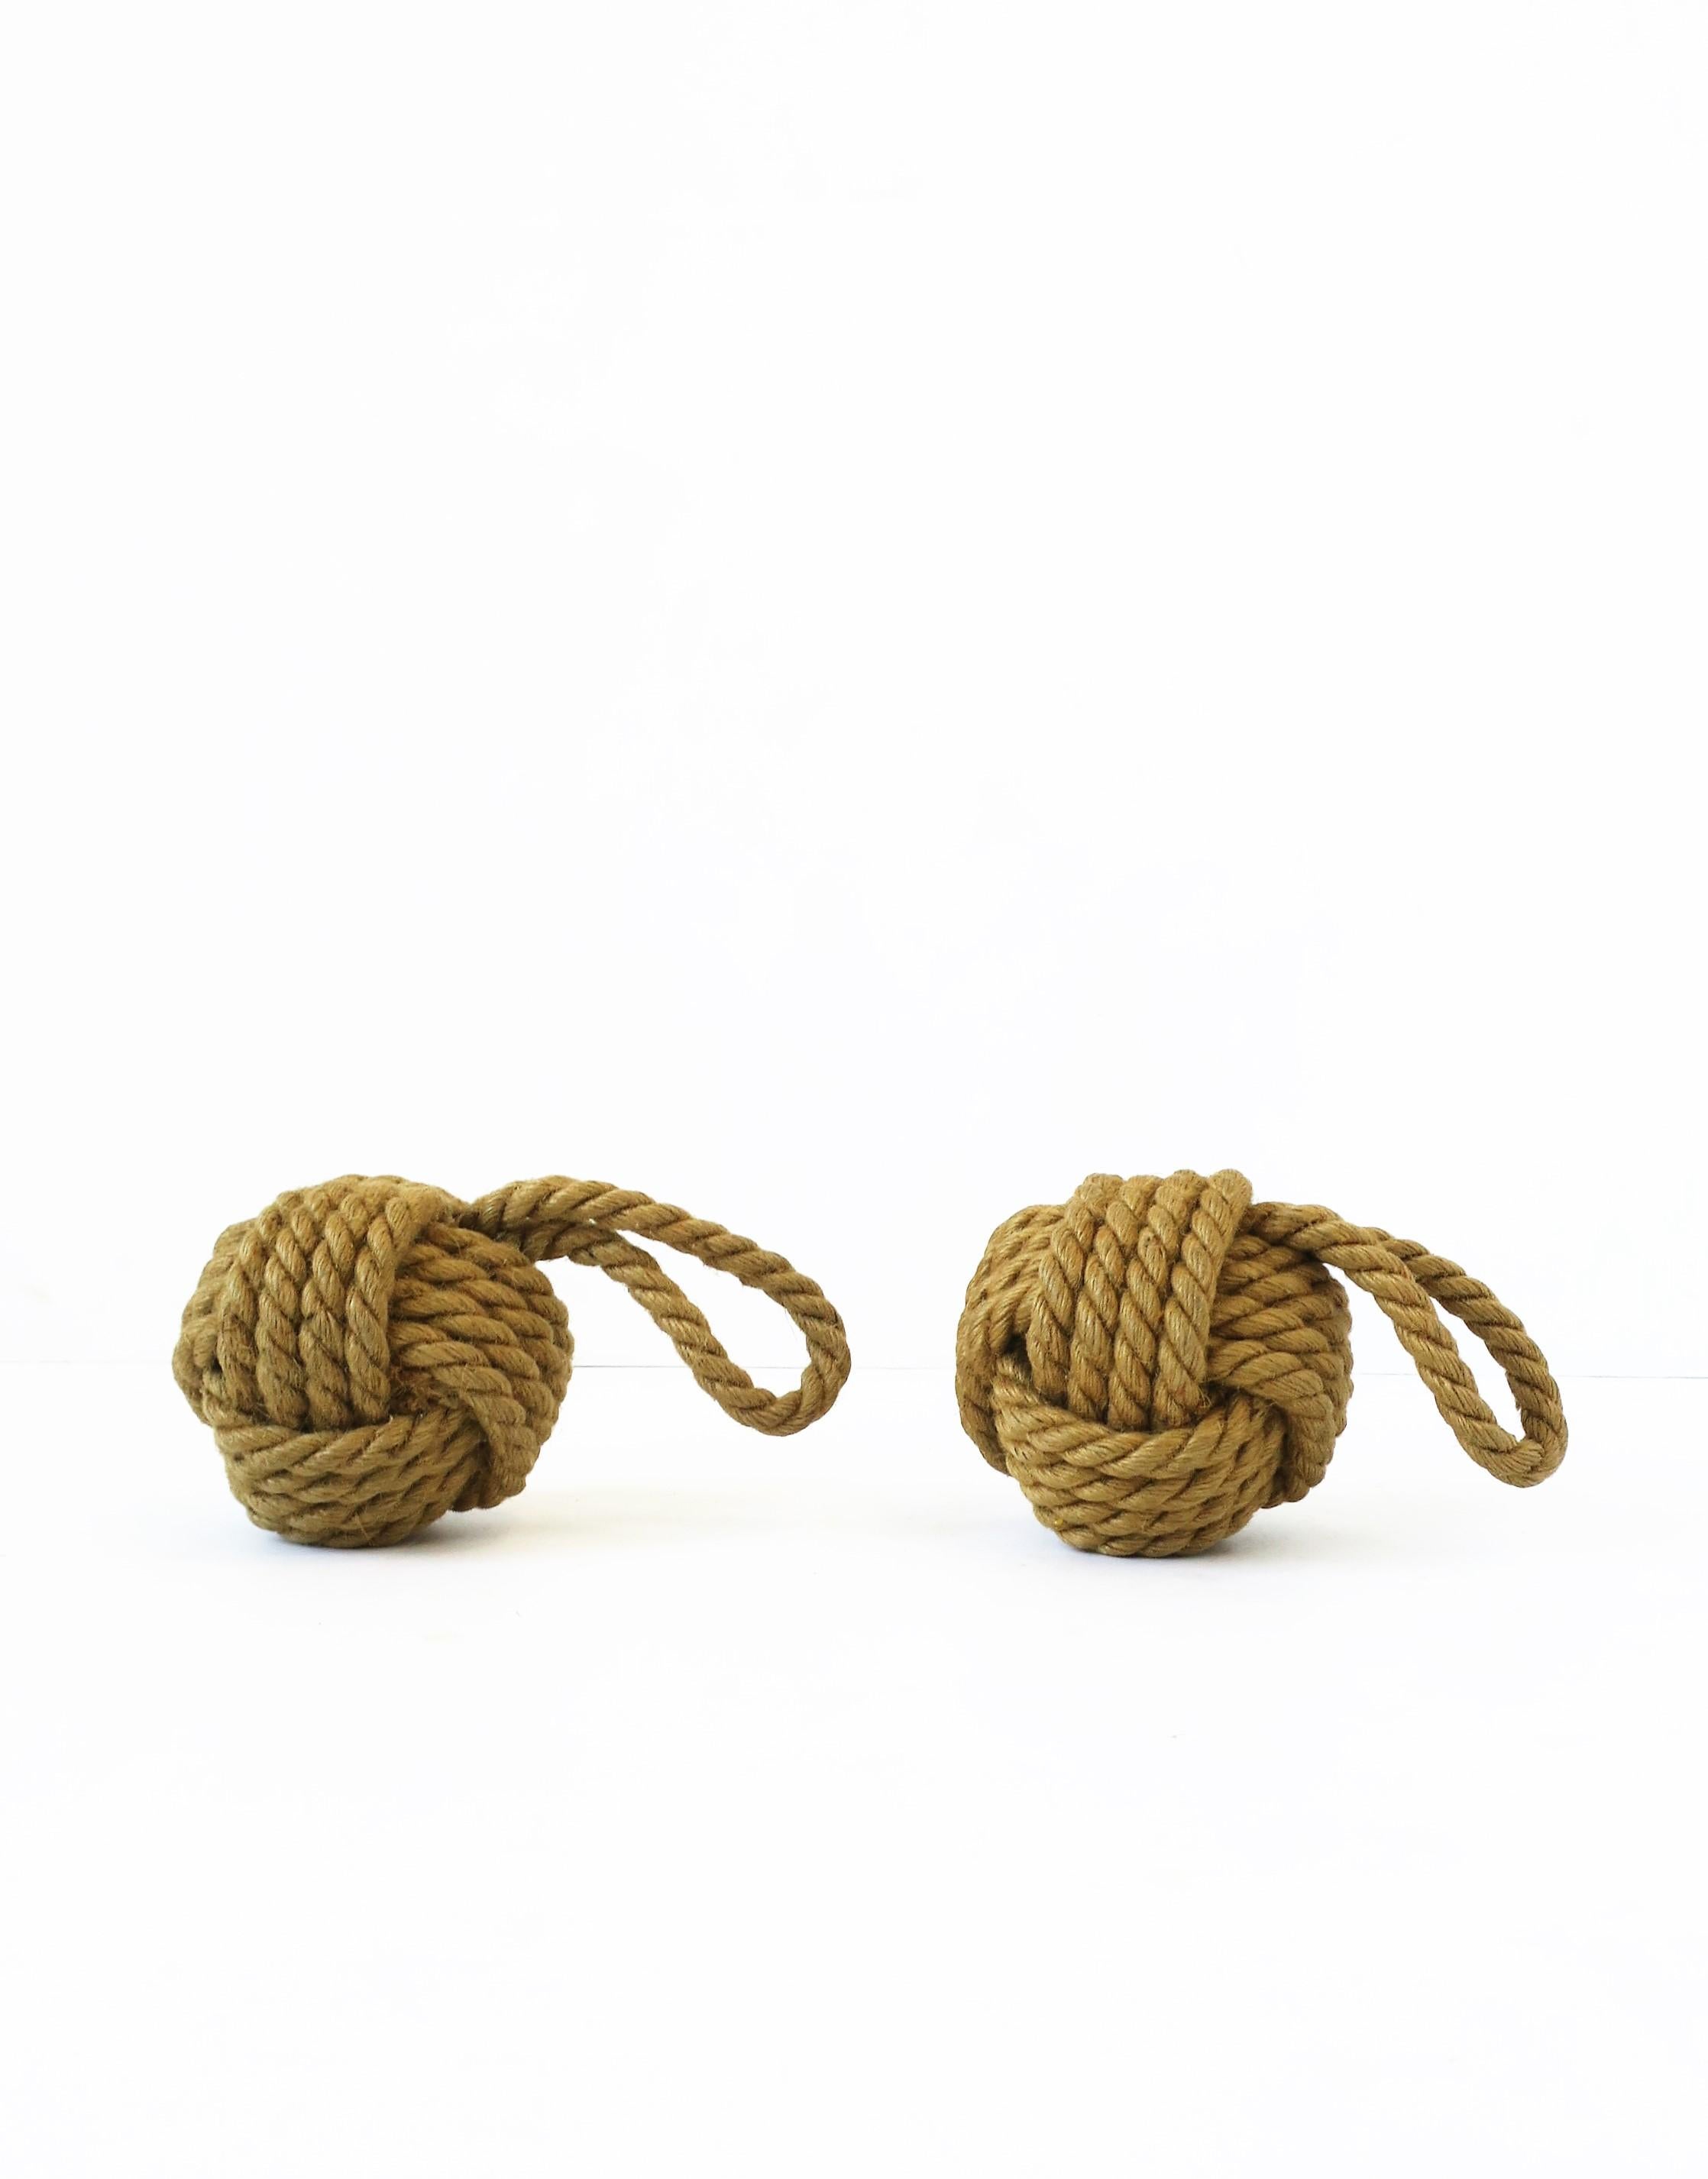 Small nautical rope knot decorative object. One (1) available now, as per listing. Measurements: 4.25